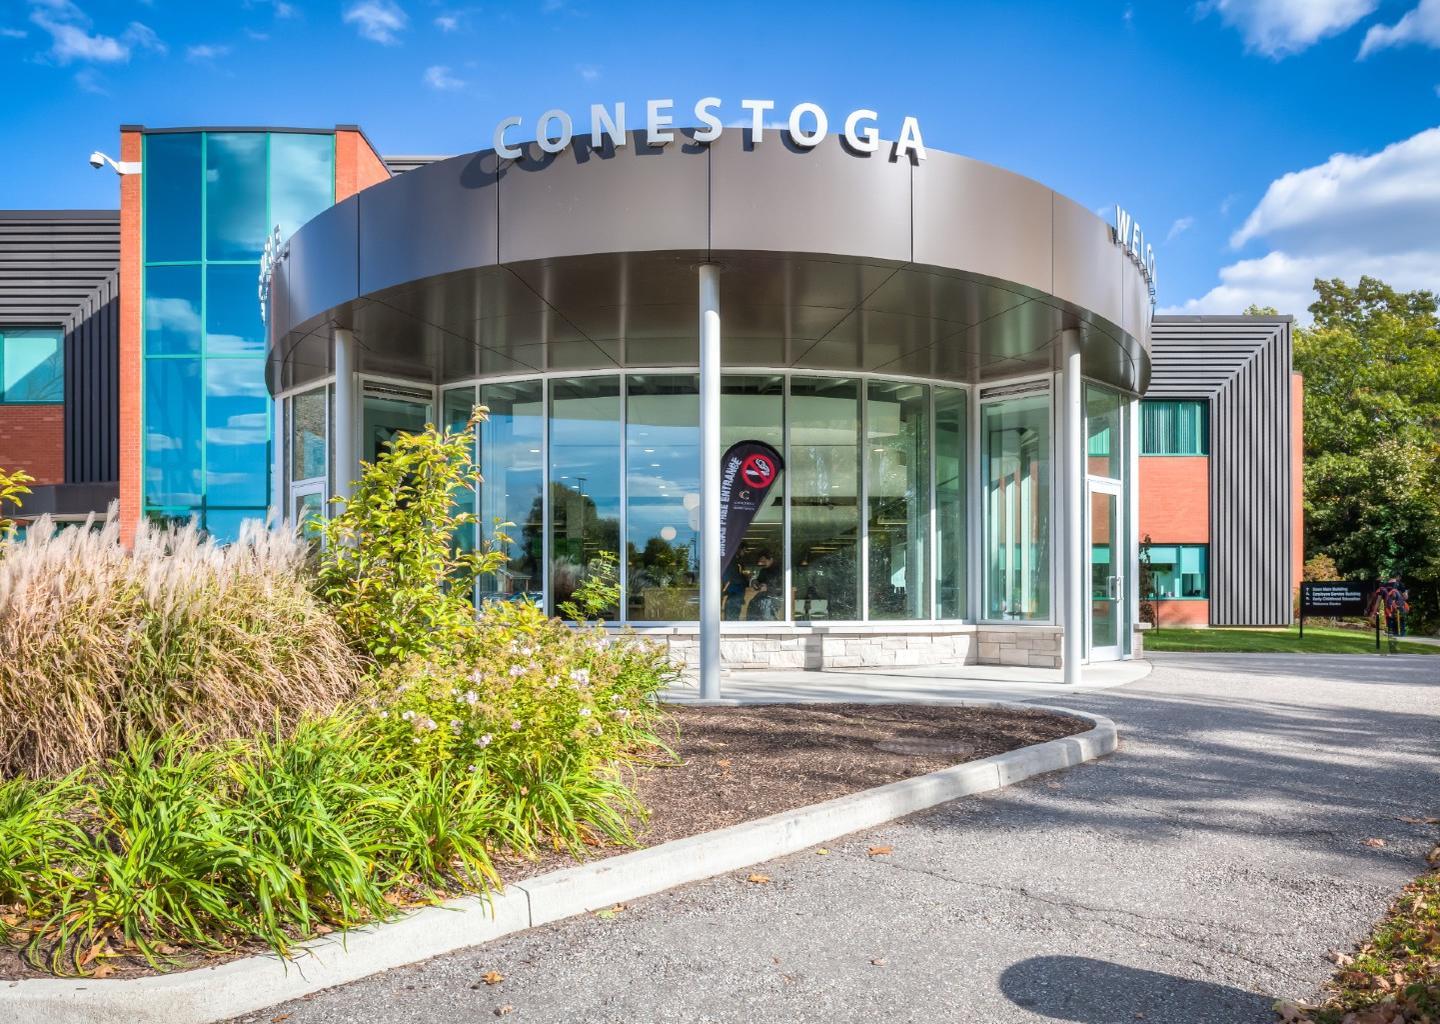 196 courses available at Conestoga College of Applied Arts ...